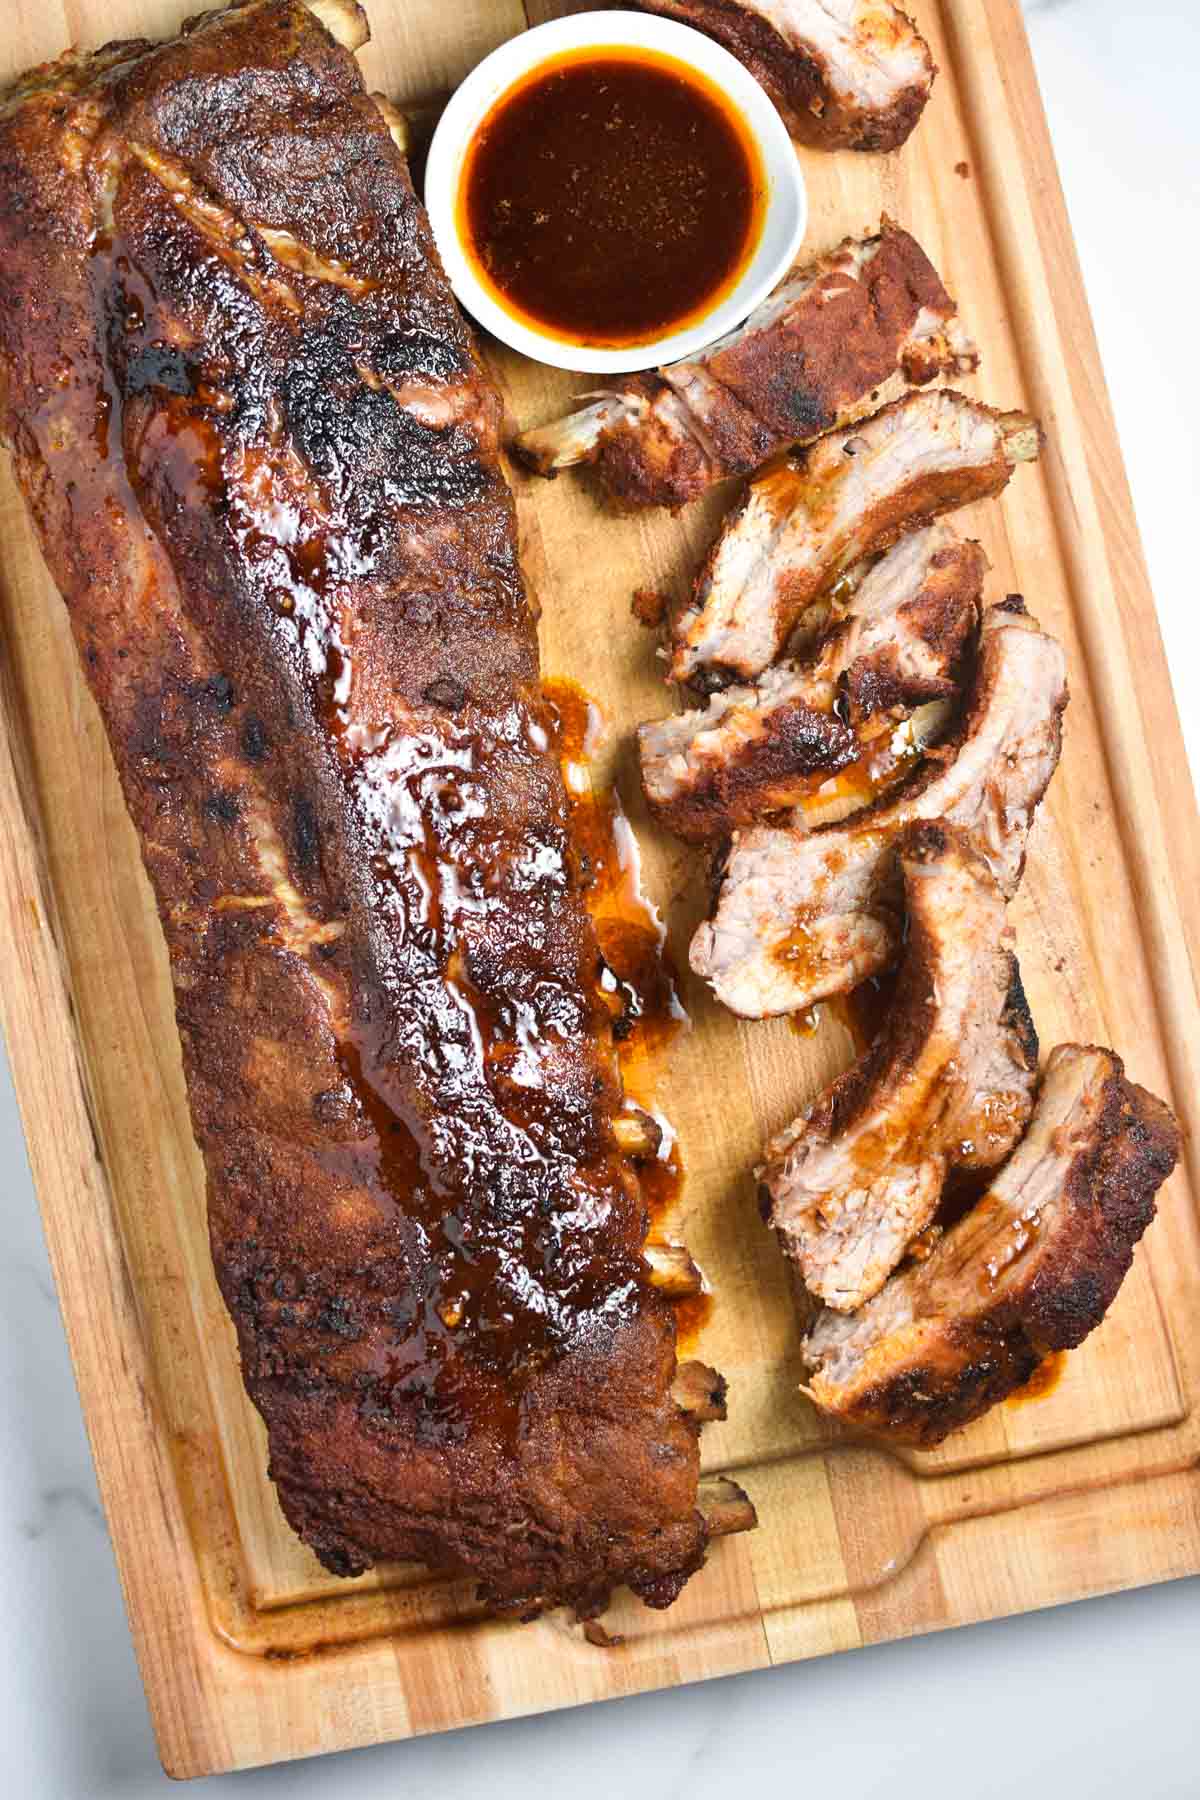 Seasoned, cooked ribs on a cutting board with a sauce.